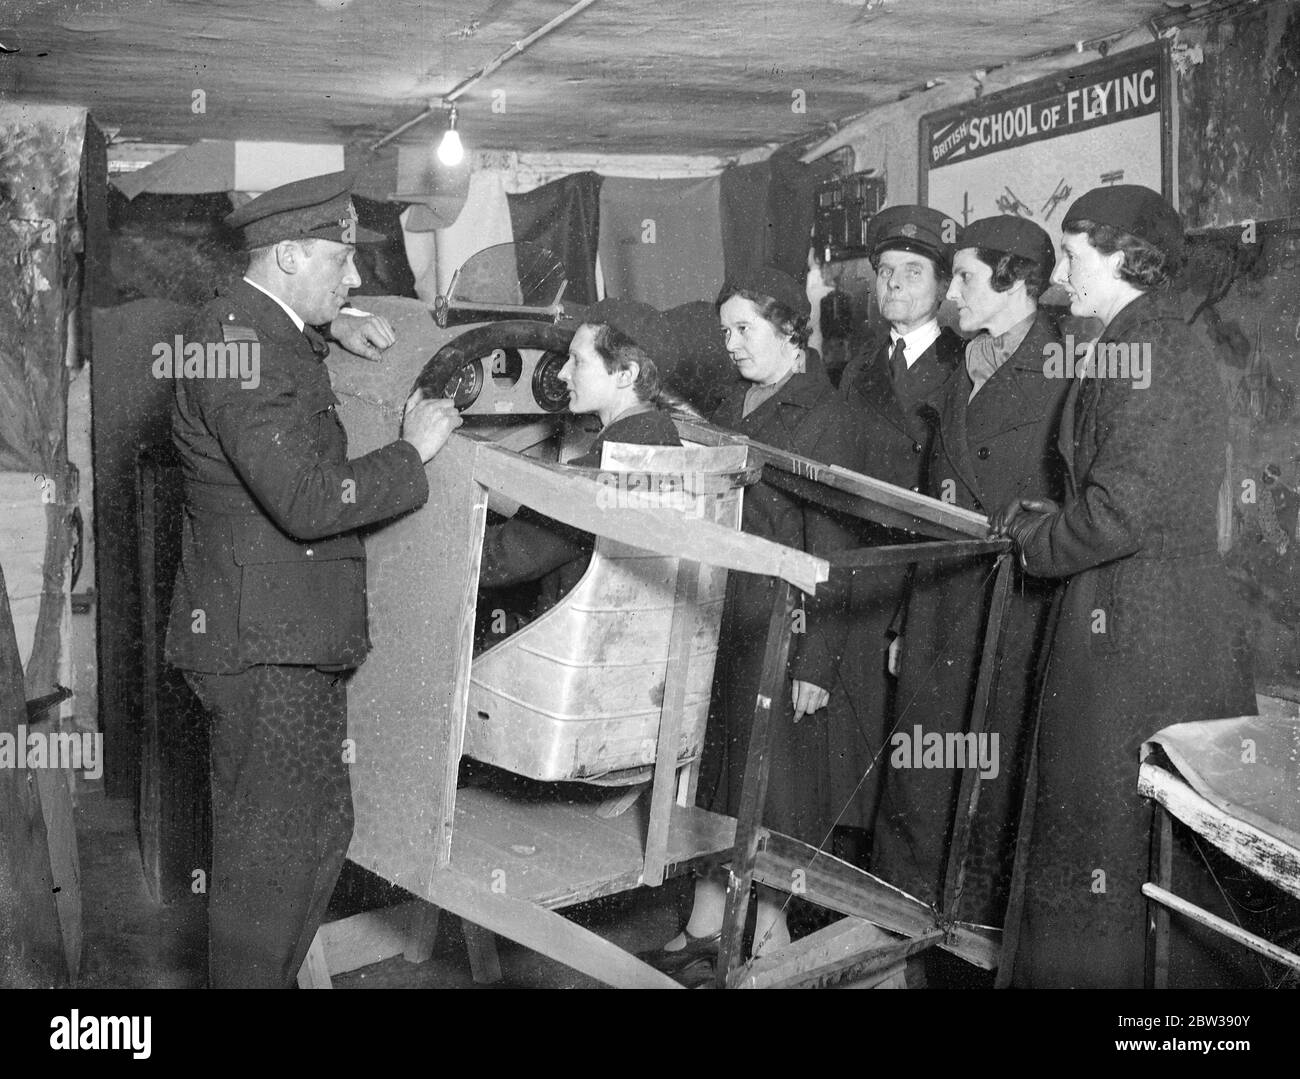 New Women ' s Reserve study ' s aviation . The recently formed Women ' s Reserve , organised by Commandant Mary Allen , is undergoing aviation instruction by skilled officers of the new British Flying Corps . The reserve recruits are given a strict curriculum of drills and lectures . Photo shows ; a class under instruction in the theory of flight at the headquarters in Peckham , London . 12 January 1934 30s, 30's, 1930s, 1930's, thirties, nineteen thirties Stock Photo